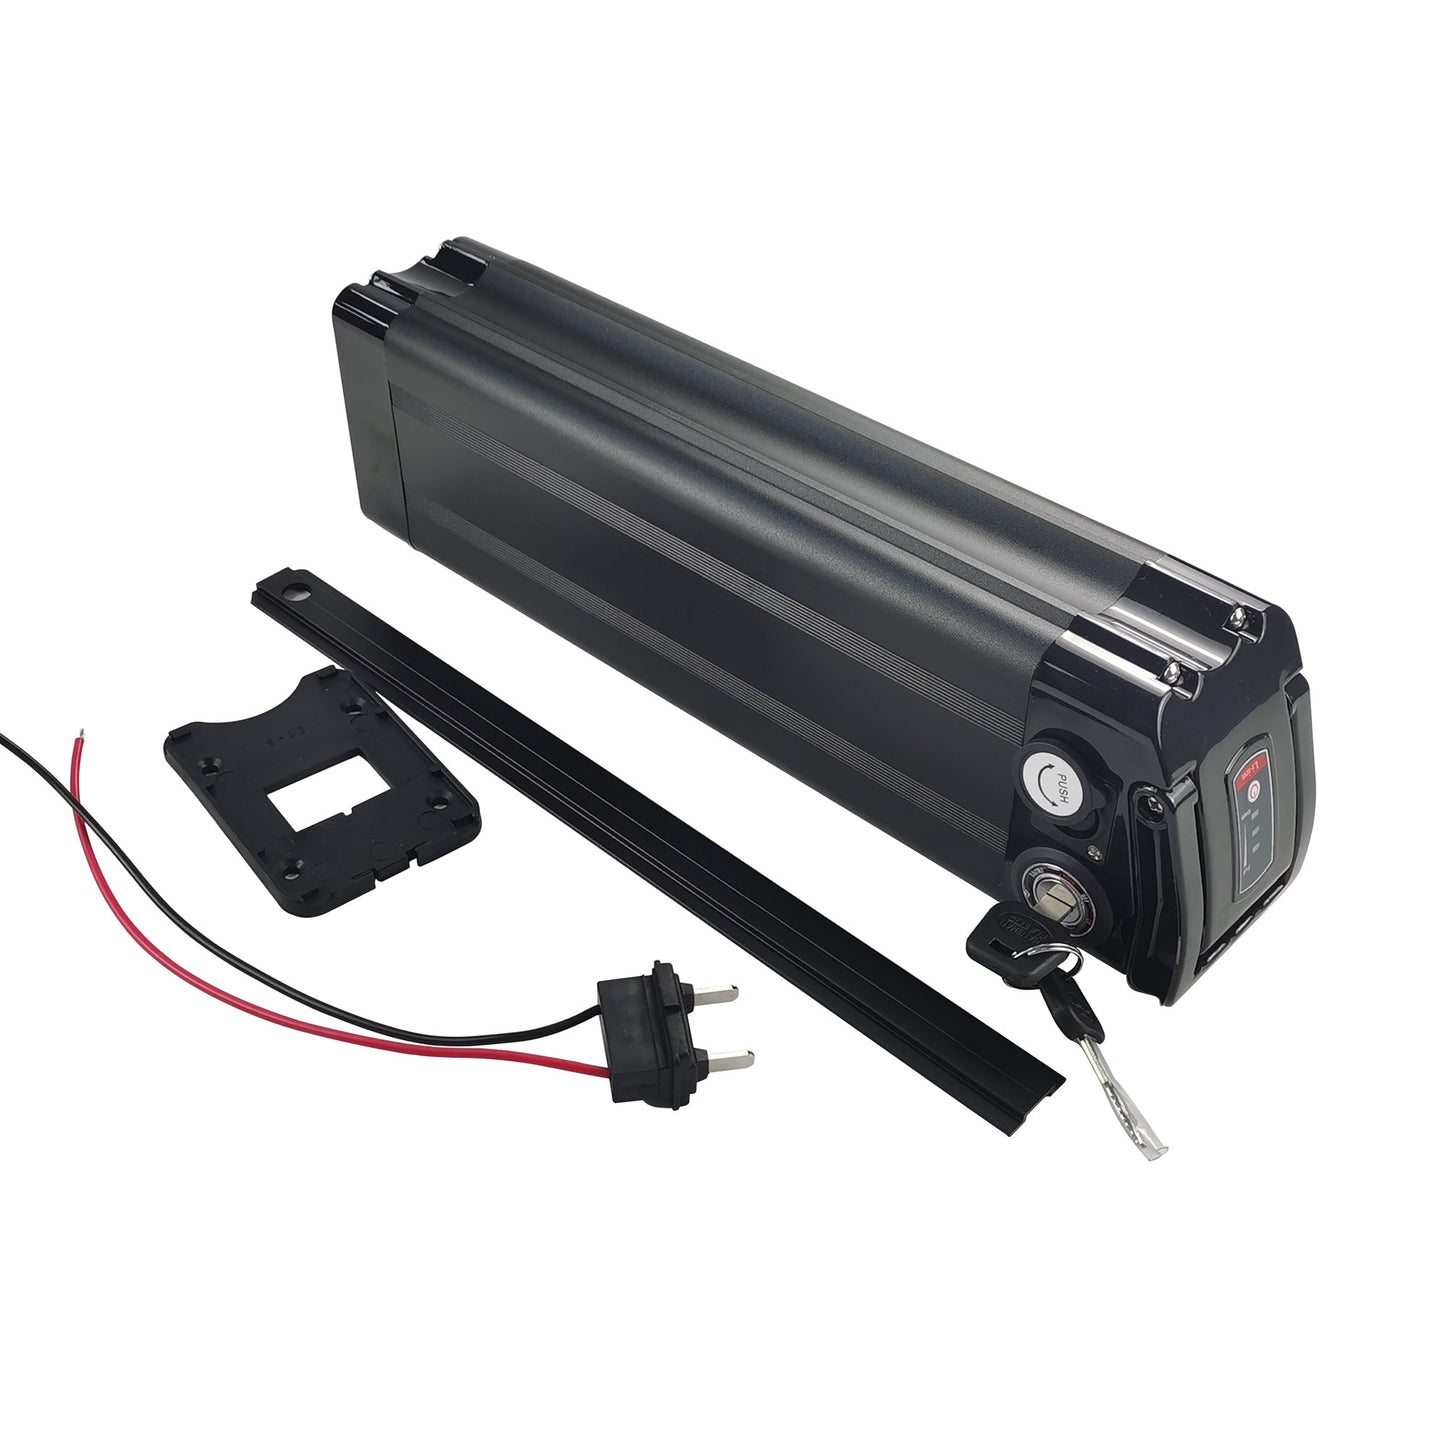 France Stock 36V17.5AH Silver Fish ebike battery Panasonic cell 25A BMS support 900W motor included 3A charger